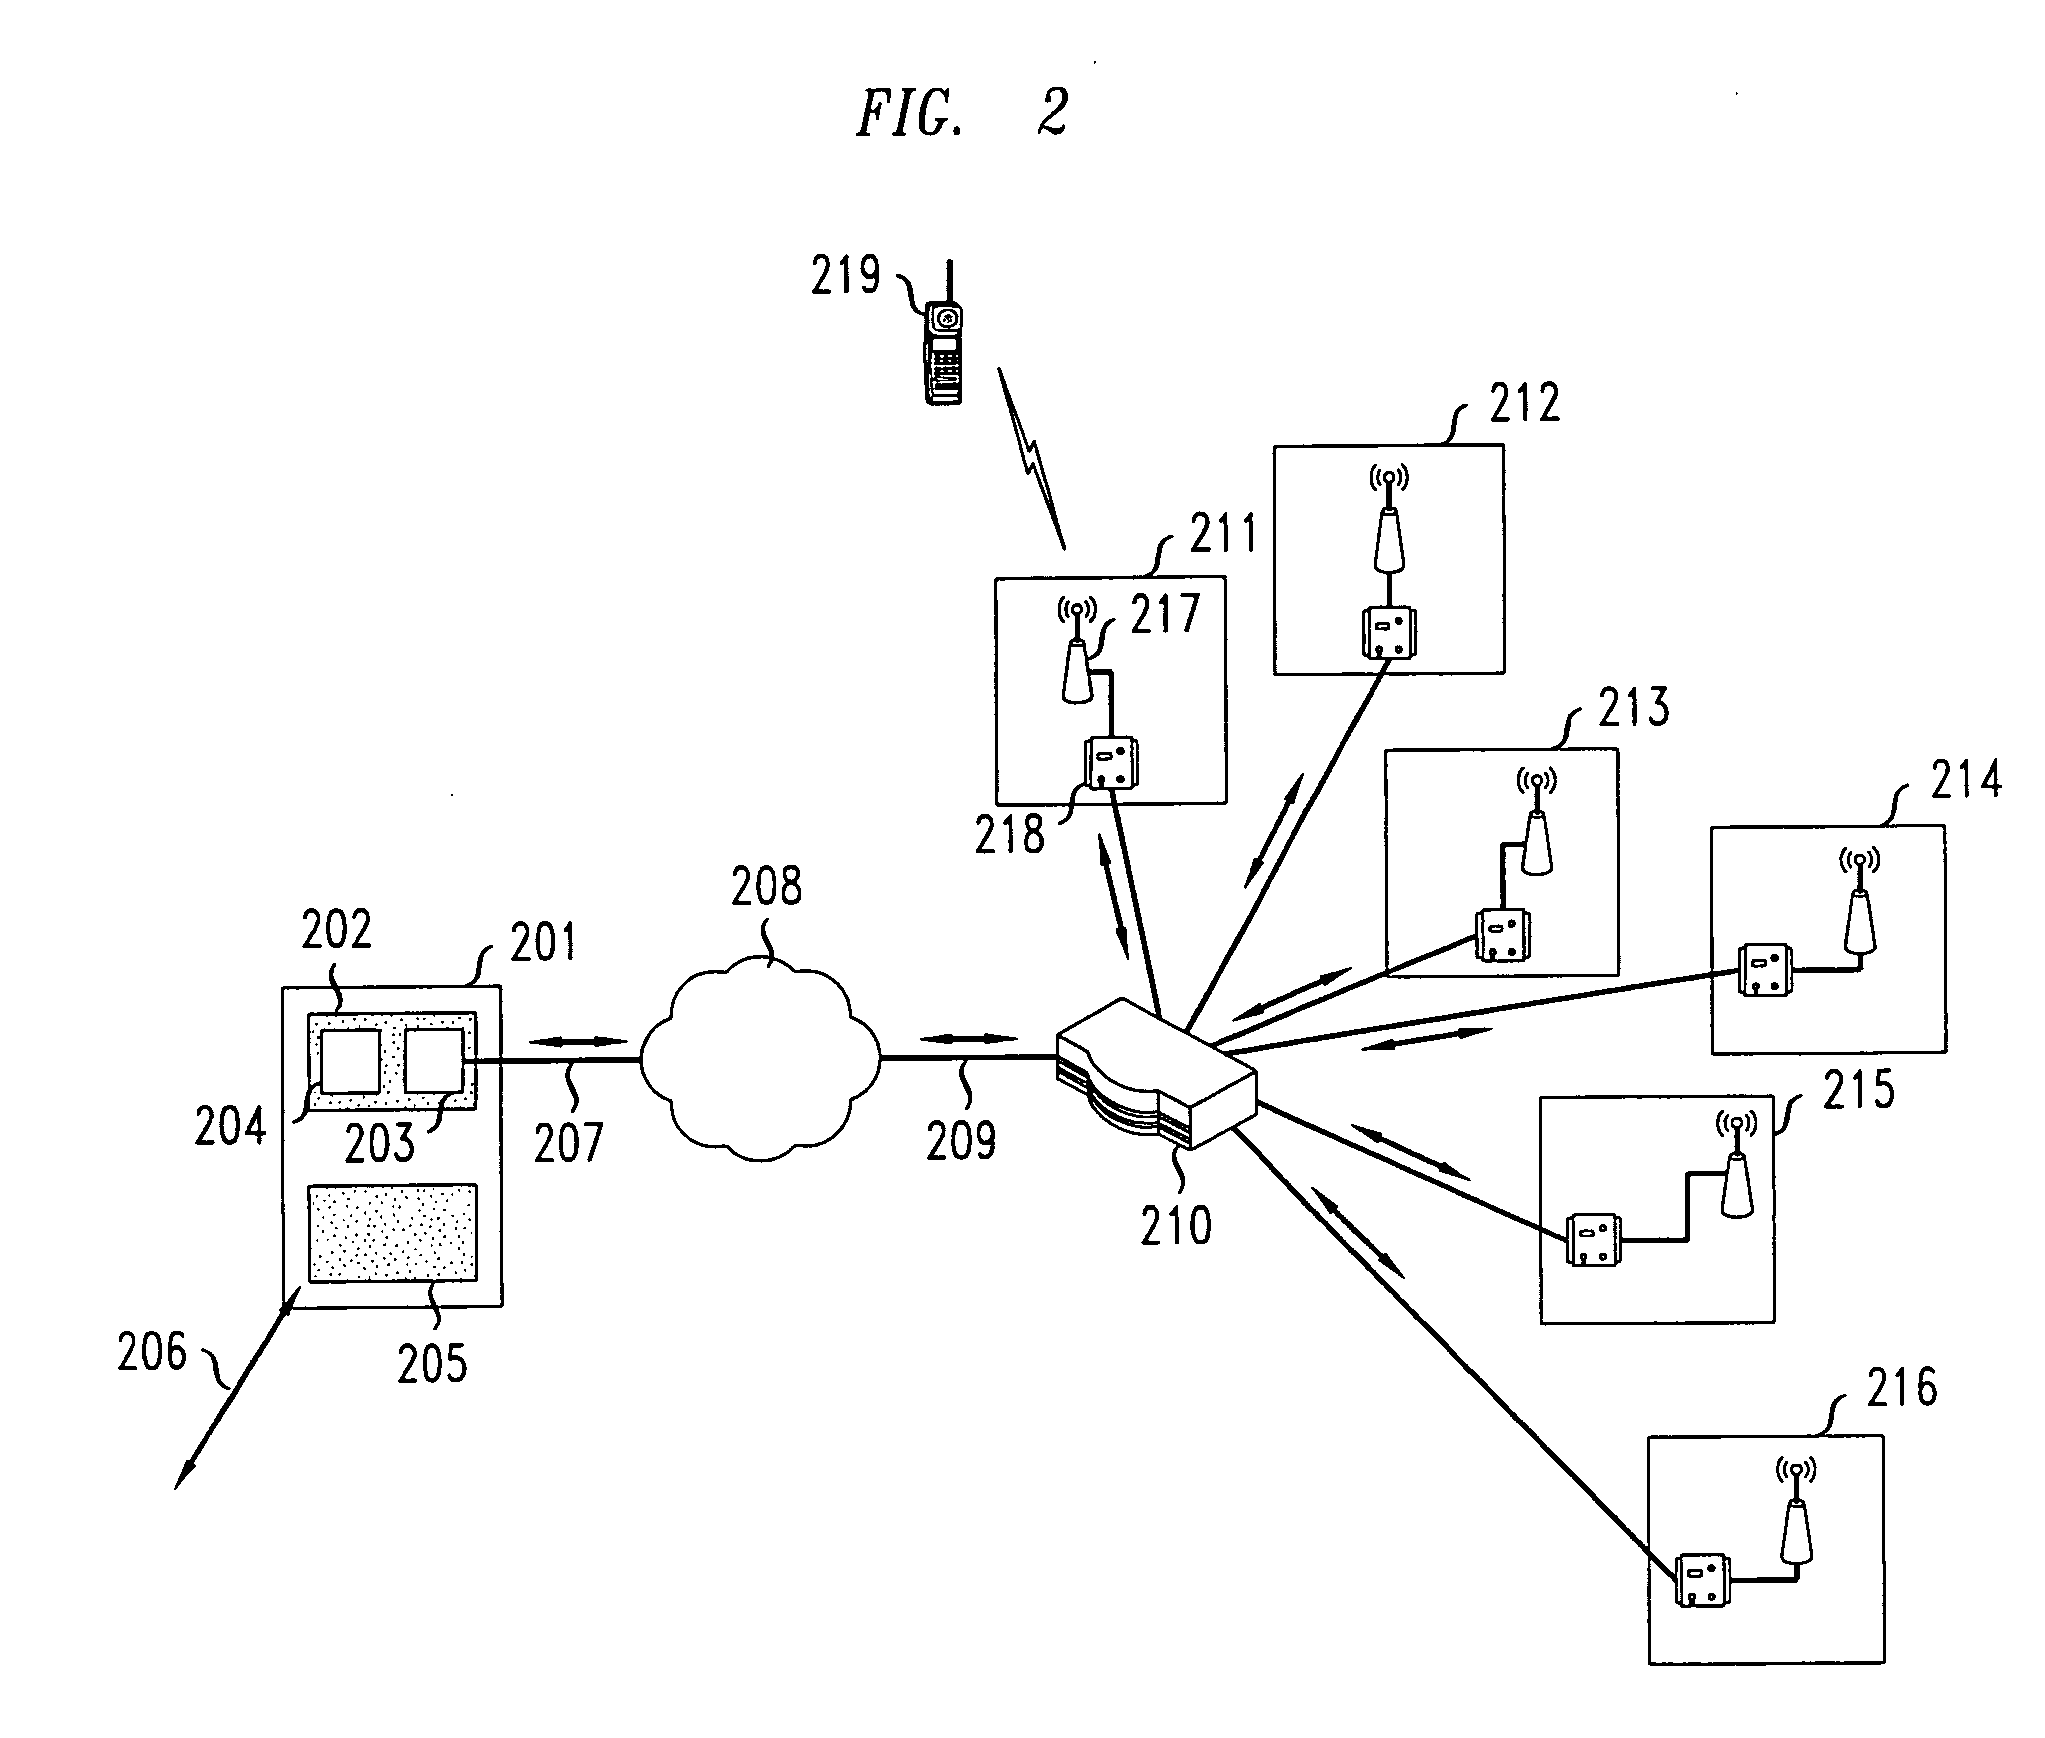 Method and apparatus for cellular communication over data networks